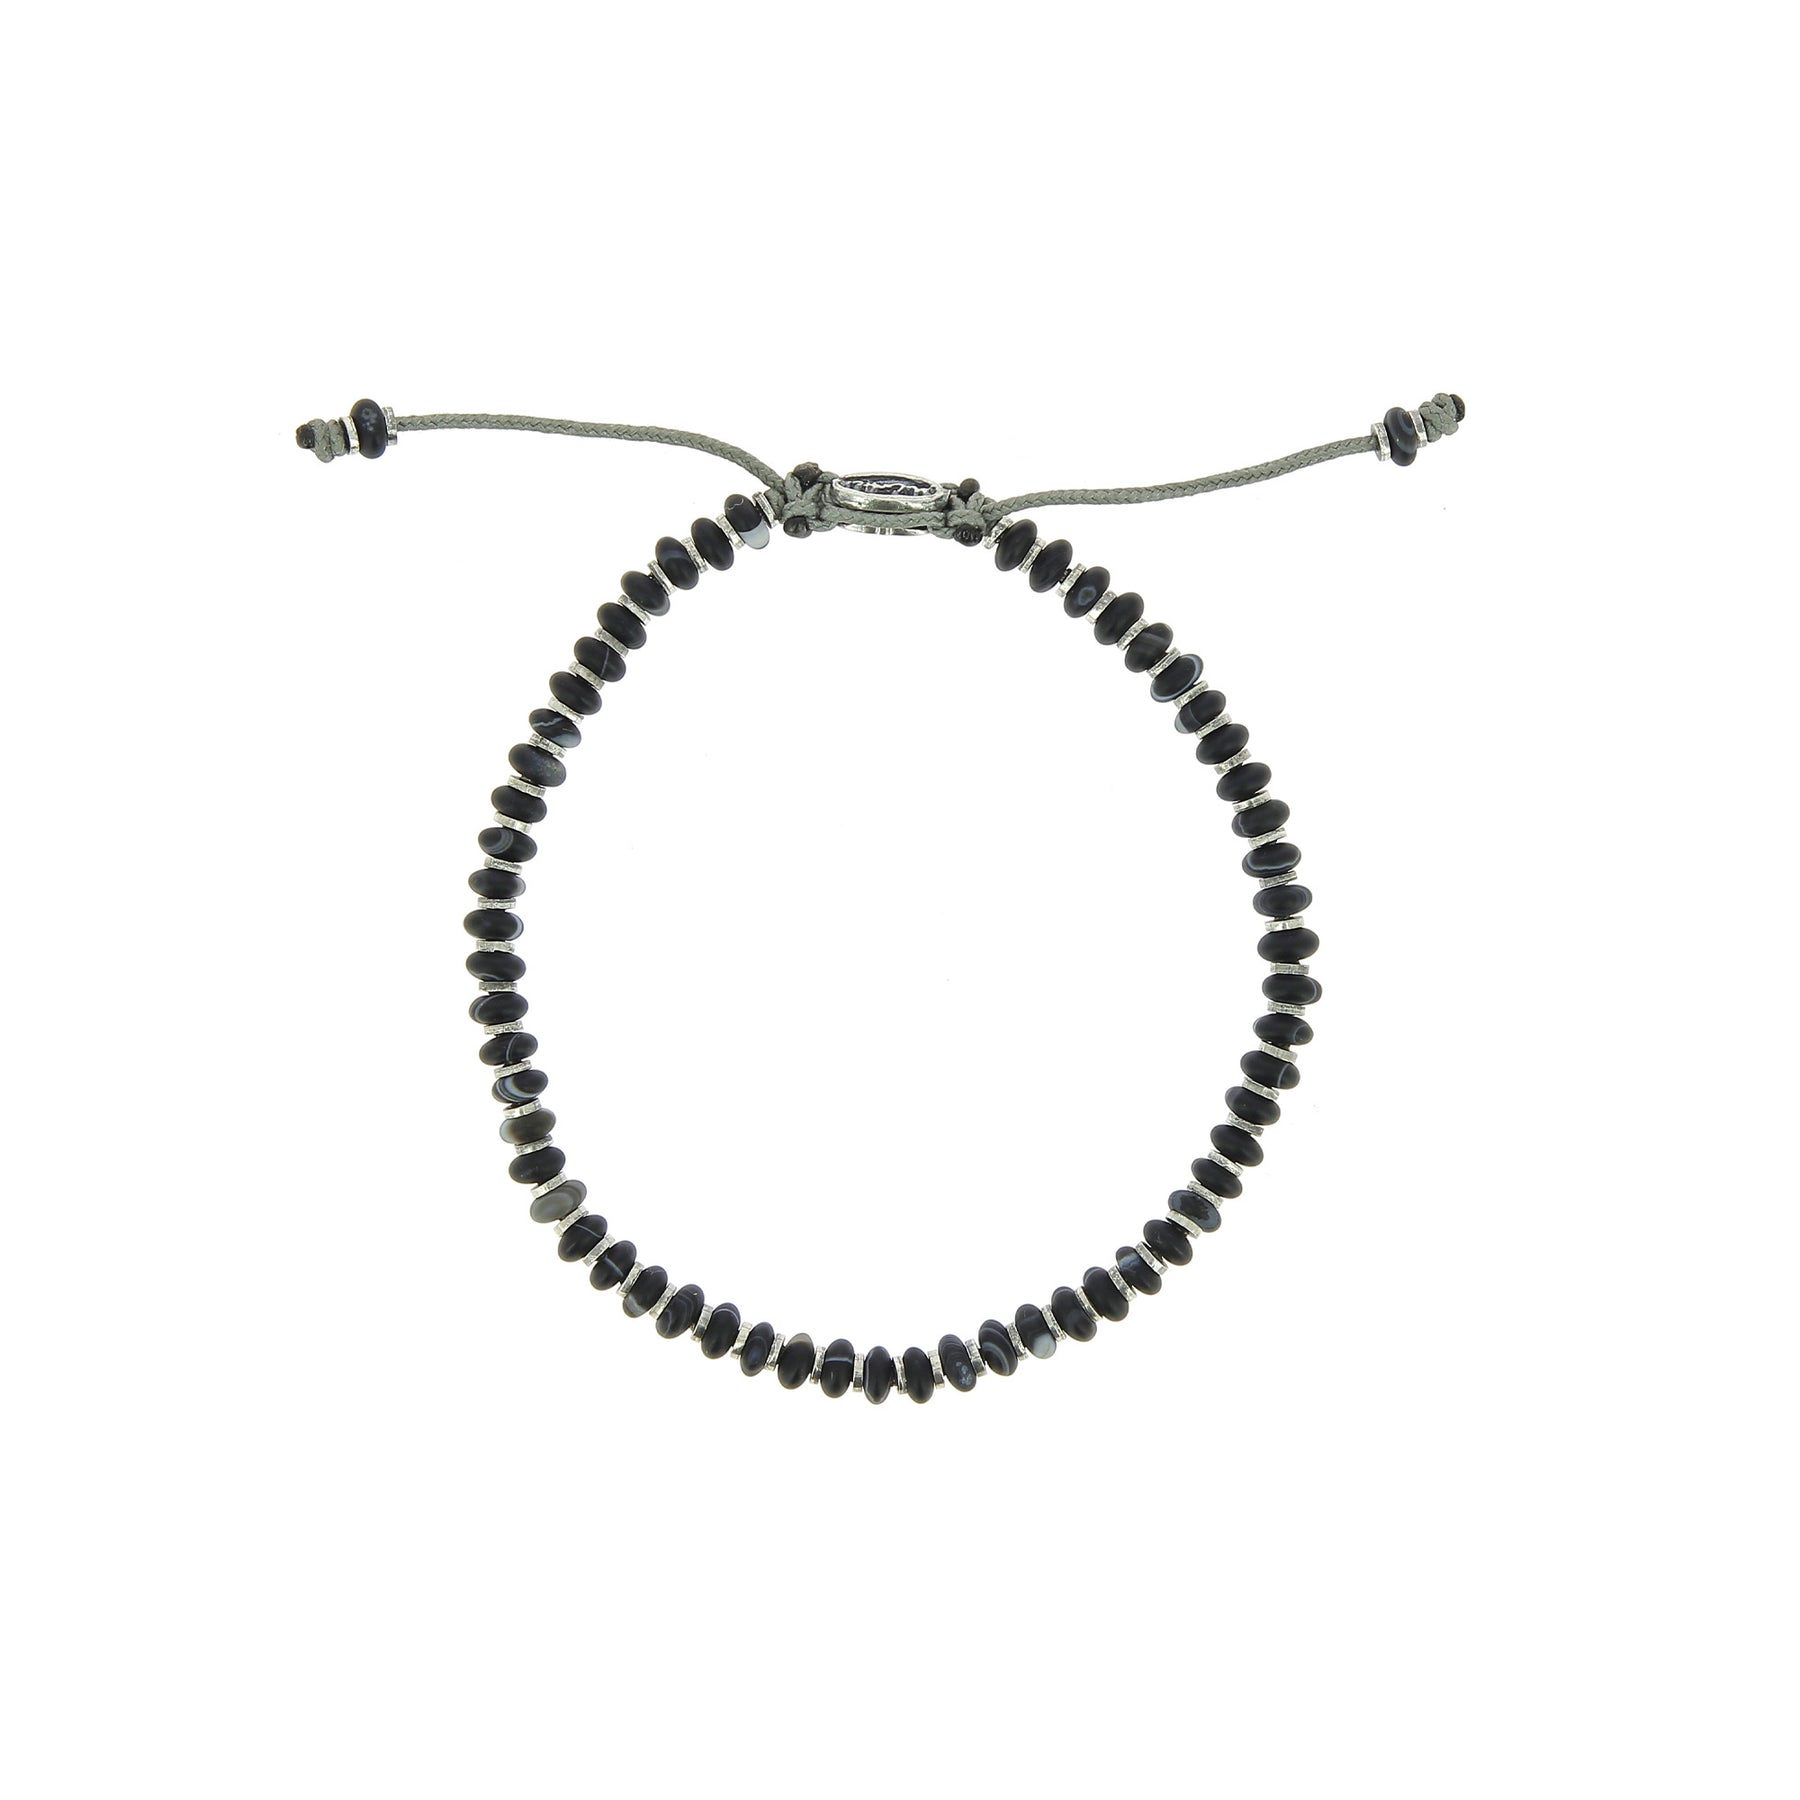 The Simple Black and White Agate Axis Armband